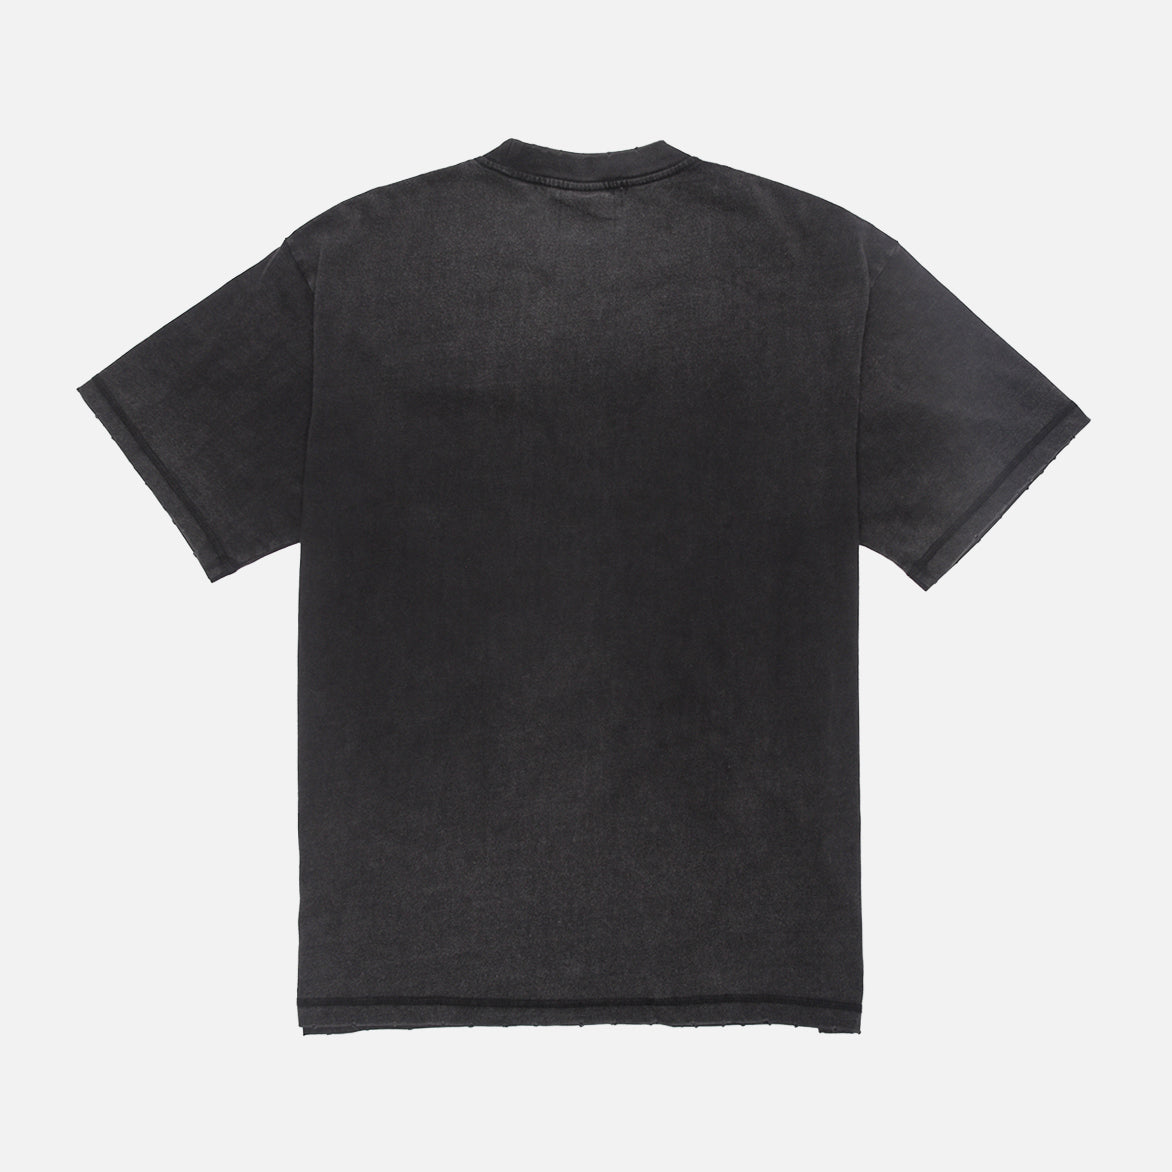 DOSAGE S/S TEE - WASHED BLACK